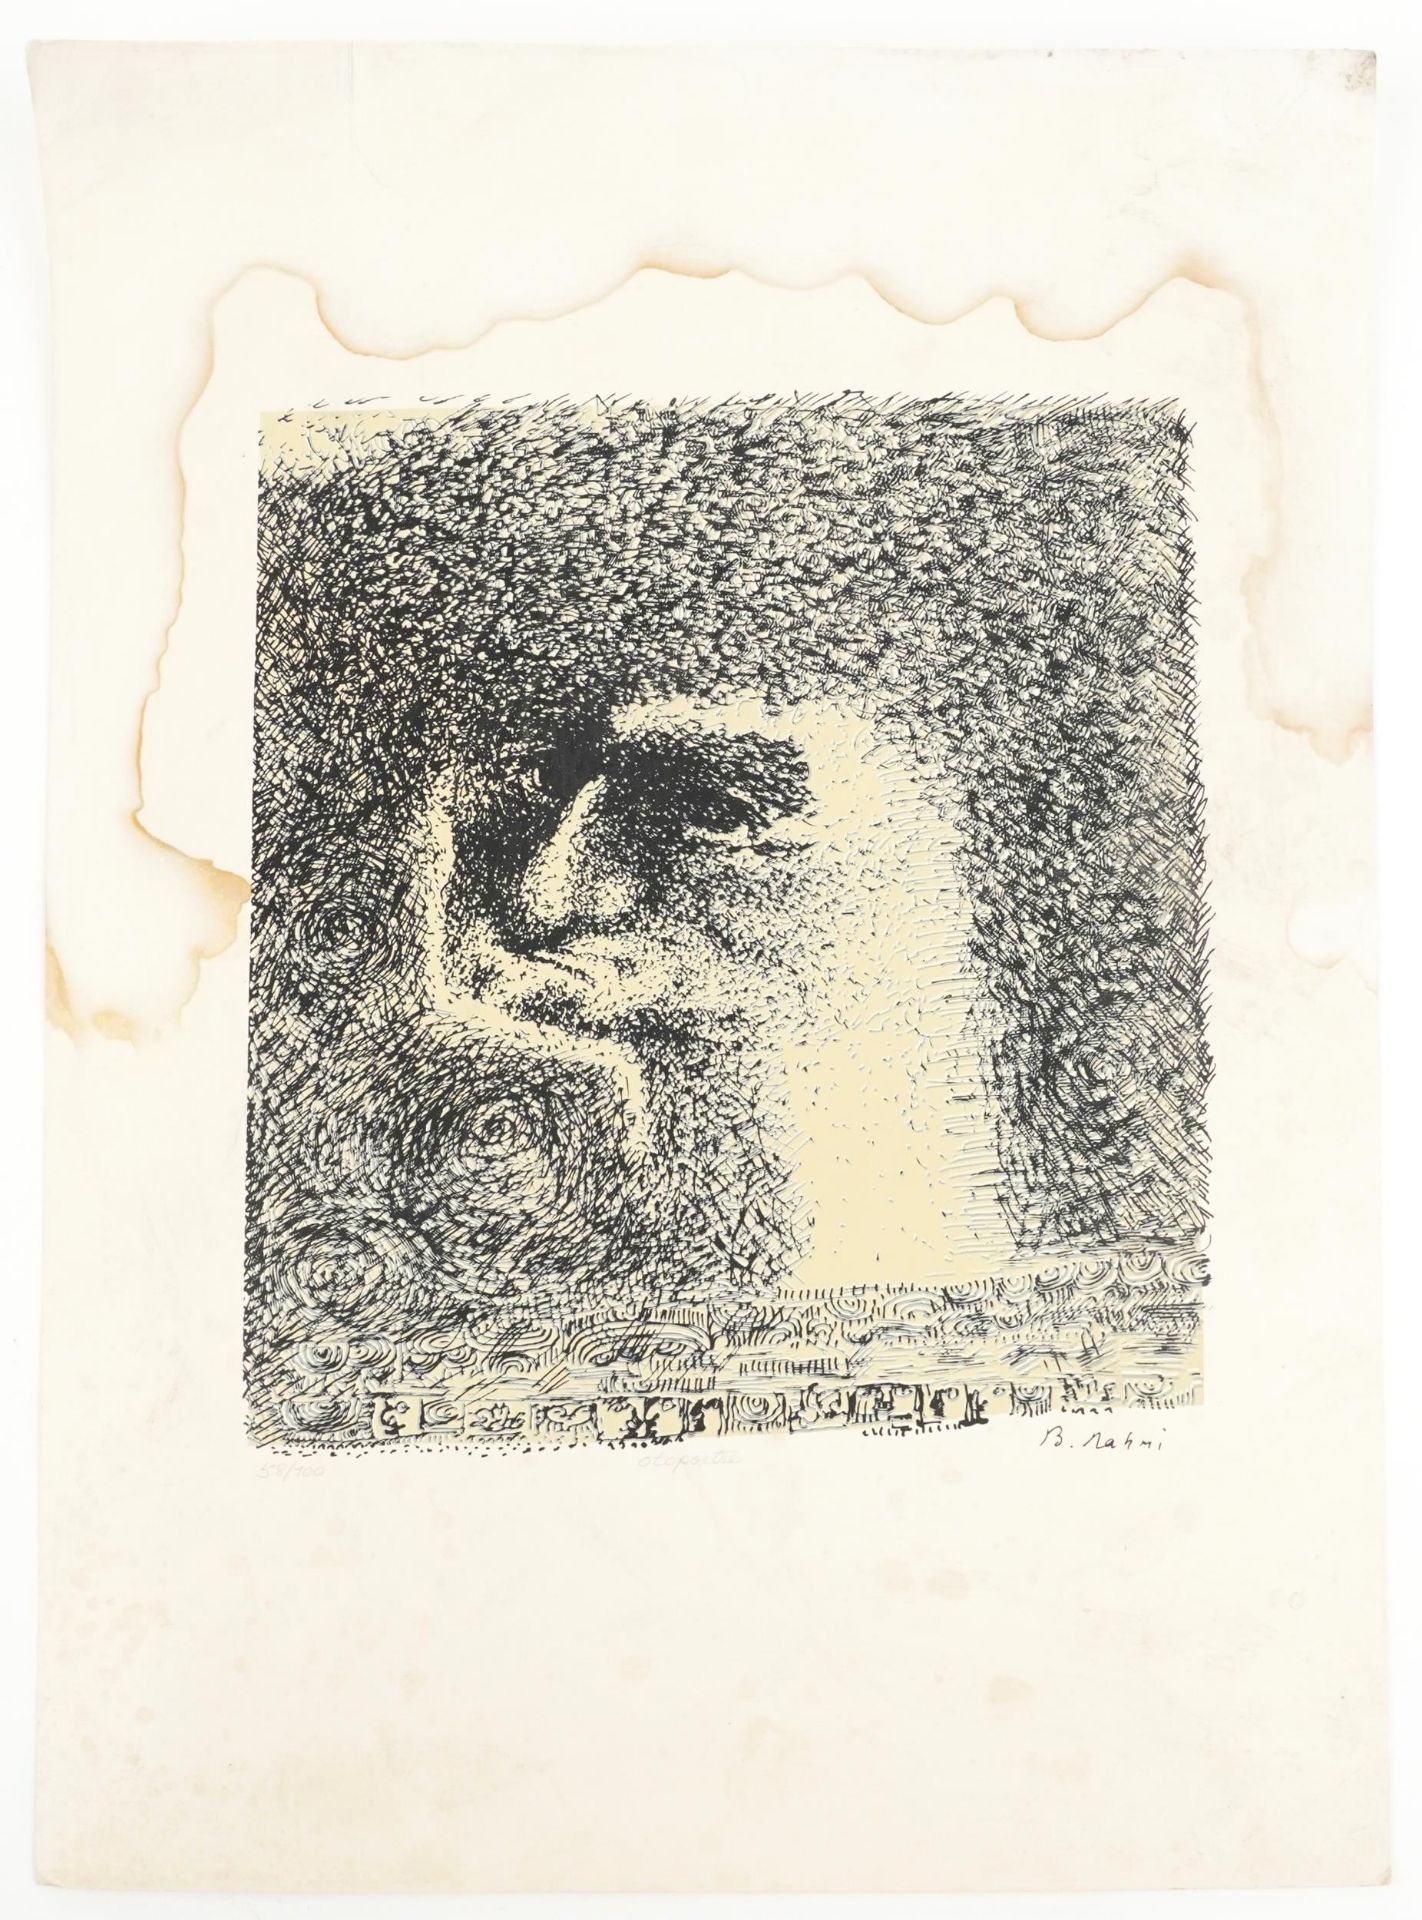 Bedri Rahmi - Abstract composition, screen print on card inscribed in pencil, limited edition 58/ - Image 2 of 5